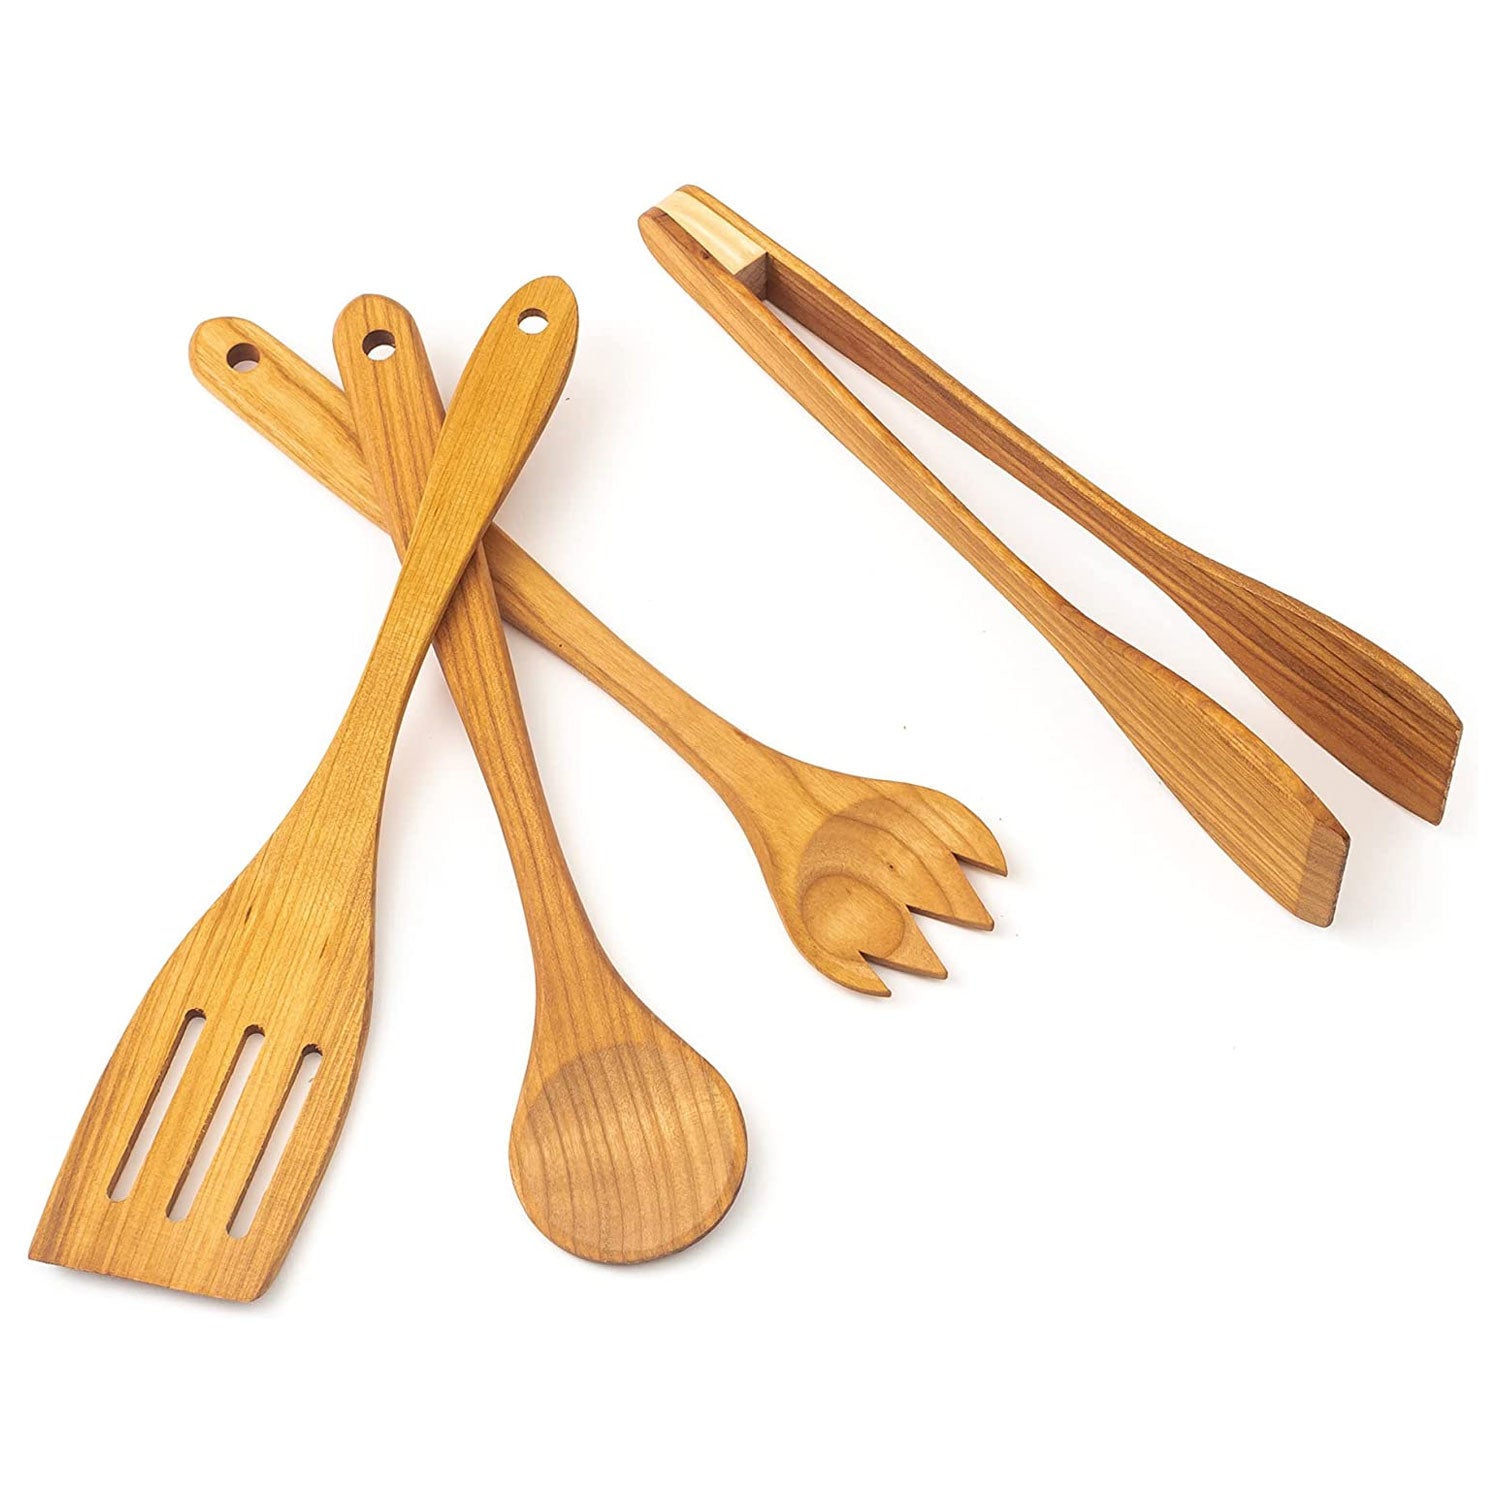 Seven Piece Hand Crafted Cherry Wood Cooking Utensil Set by Four